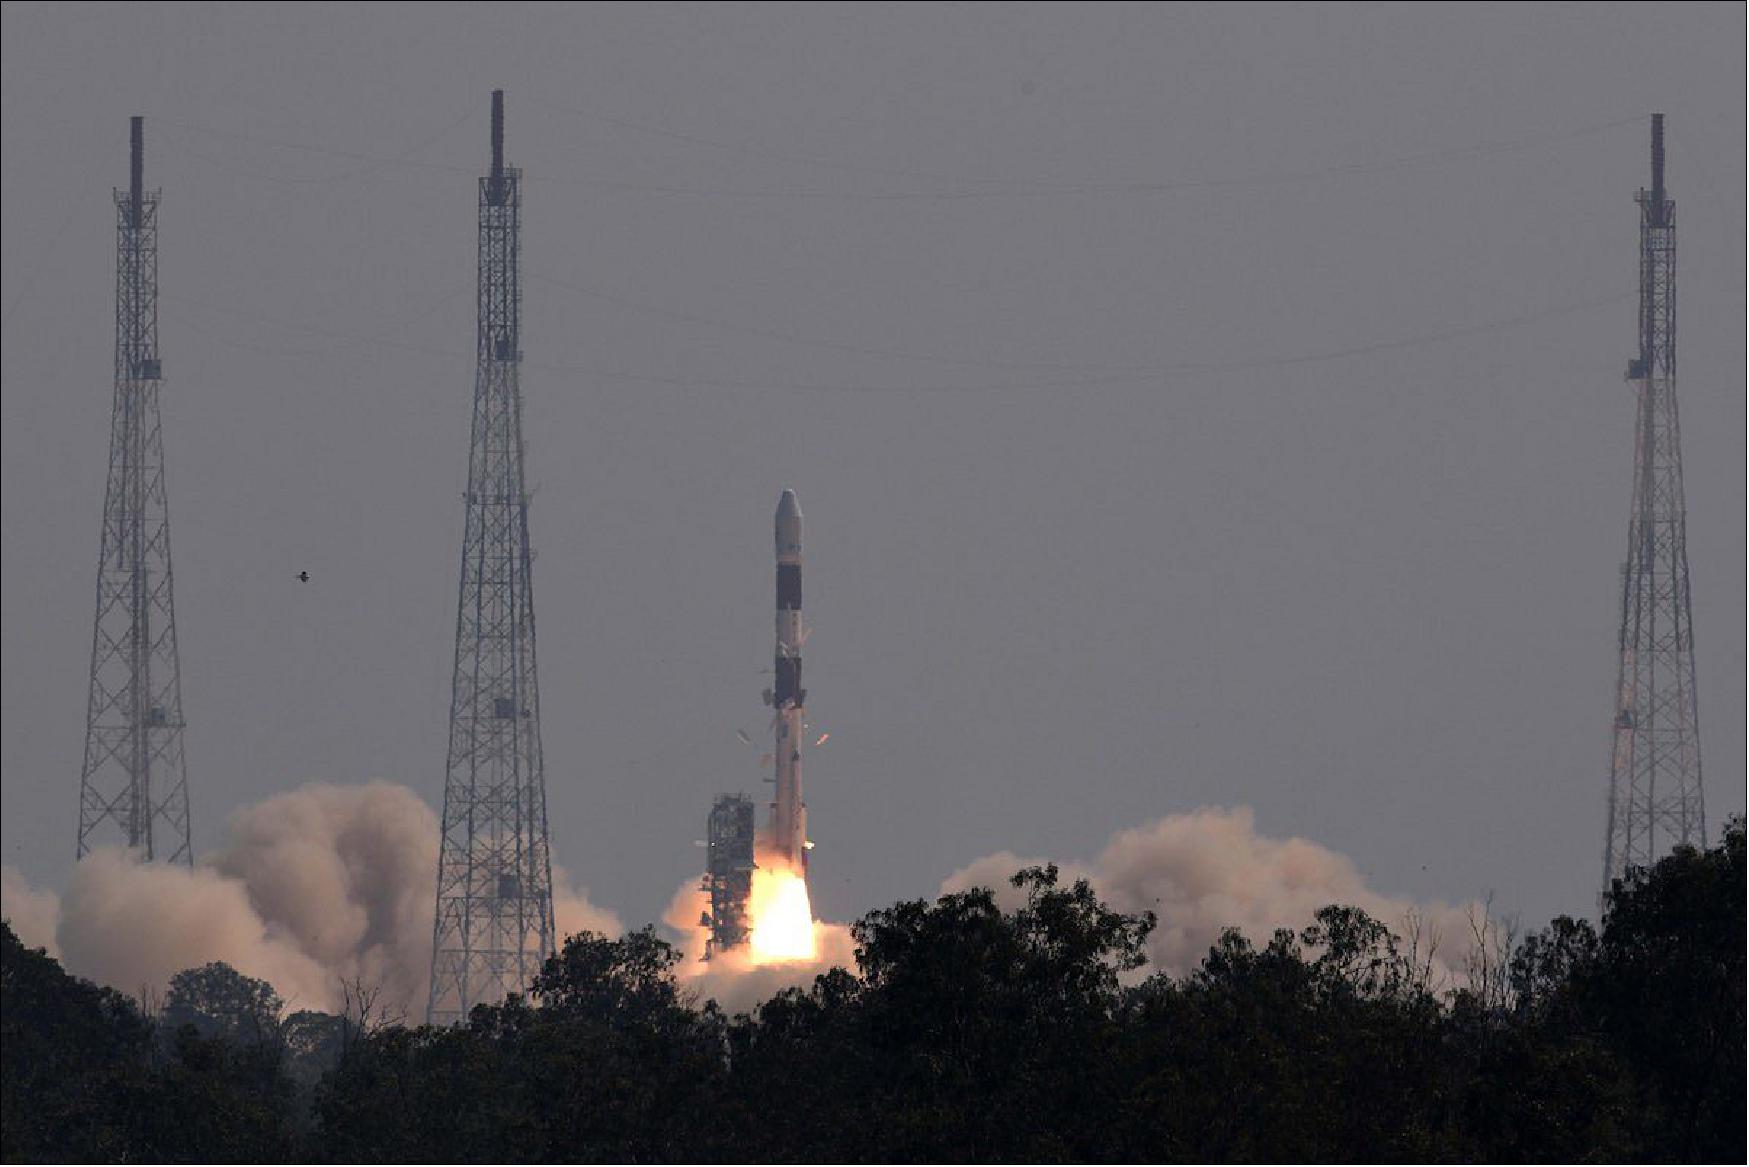 Figure 5: The PSLV (Polar Satellite Launch Vehicle) lifts off from the Satish Dhawan Space Center with the Amazonia 1 satellite and 18 secondary payloads (image credit: ISRO)